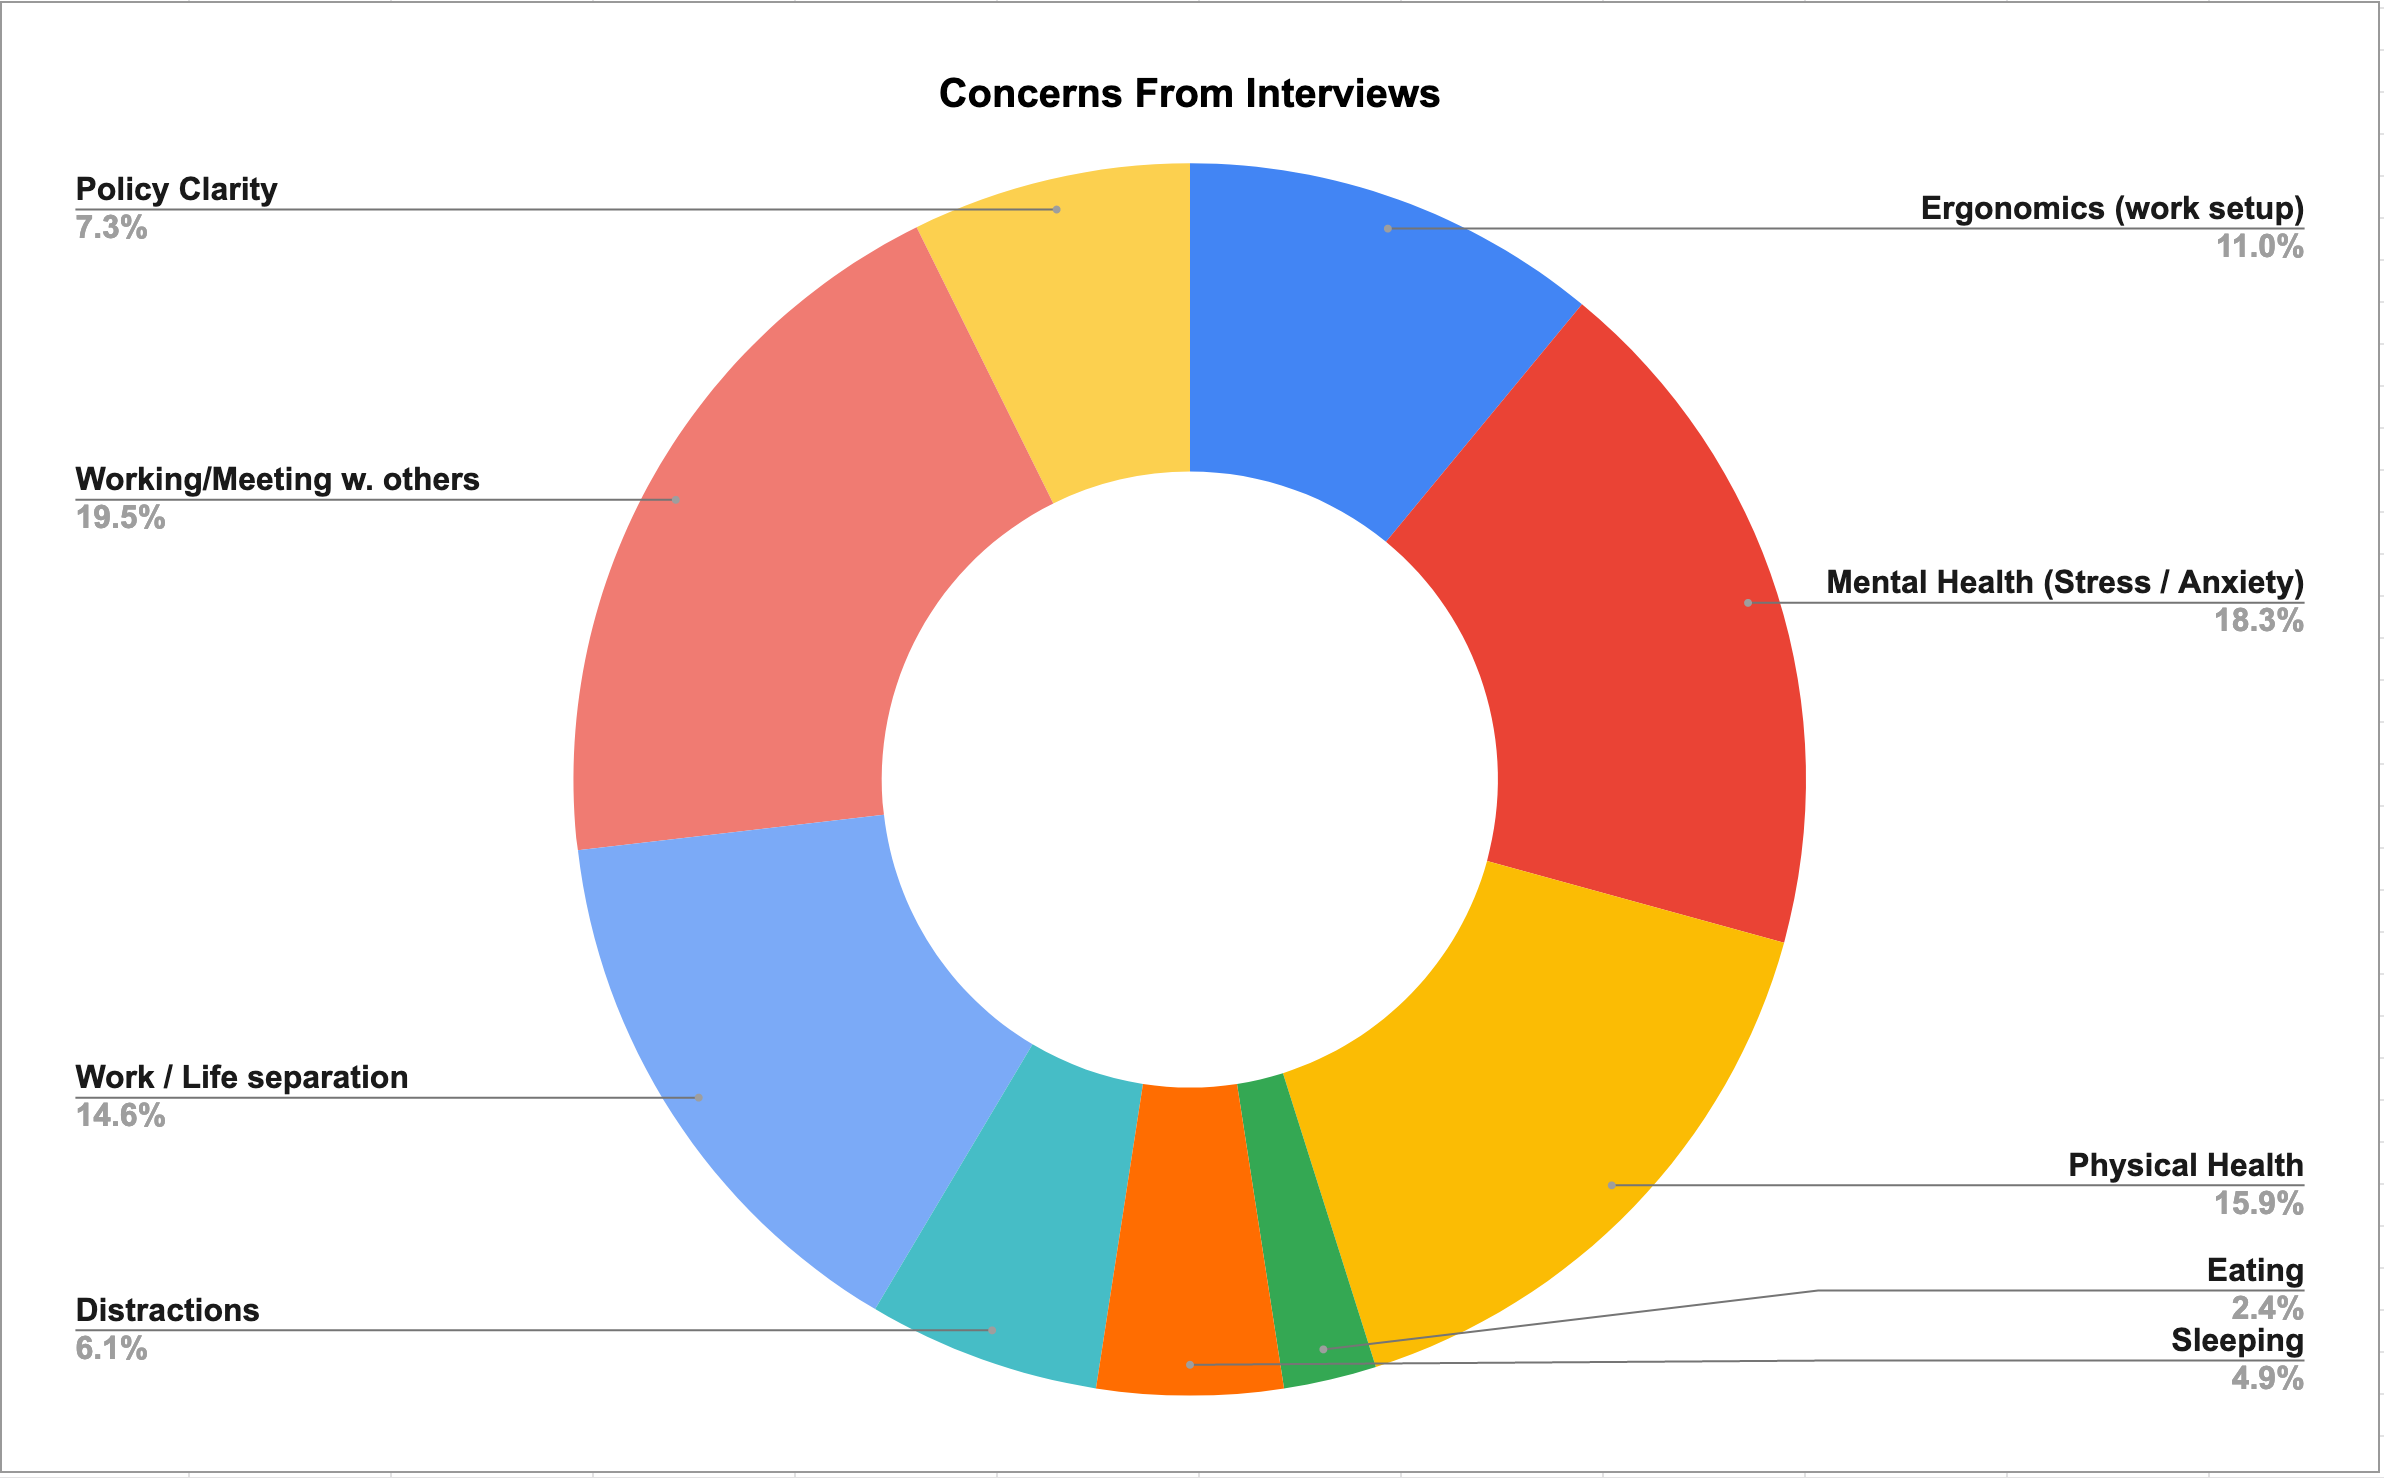 A breakdown of concerns from the interviews.